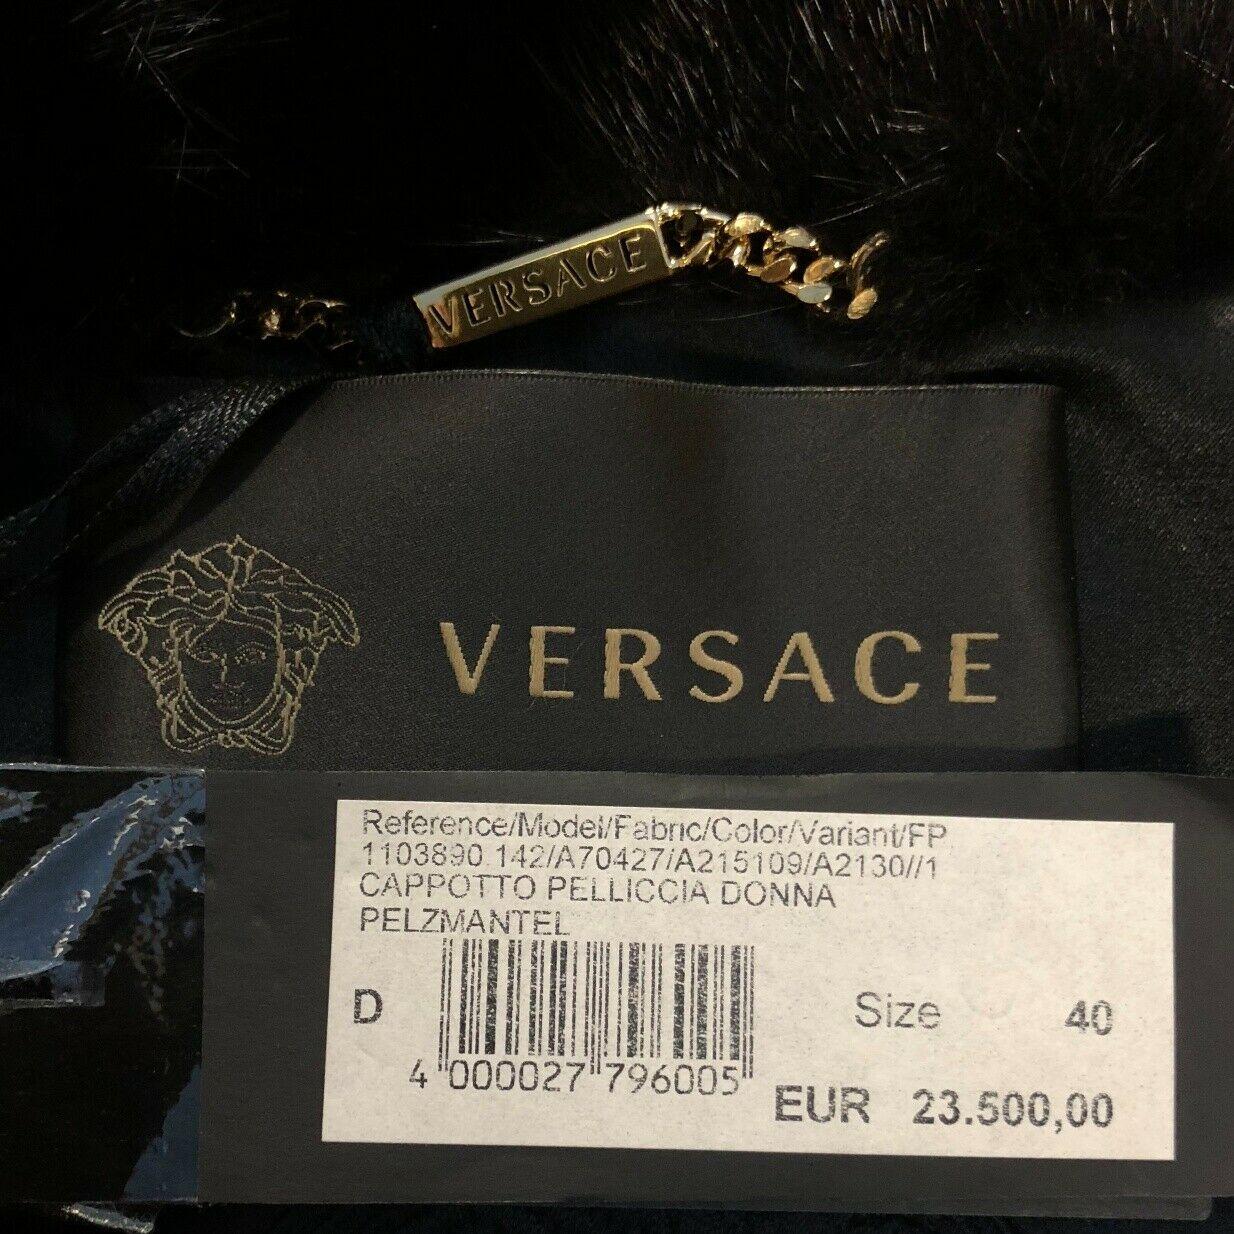 Women's VERSACE RUNWAY MINK FUR COAT WITH CRYSTAL EMBELLISHED Buttons 40 - 6 For Sale